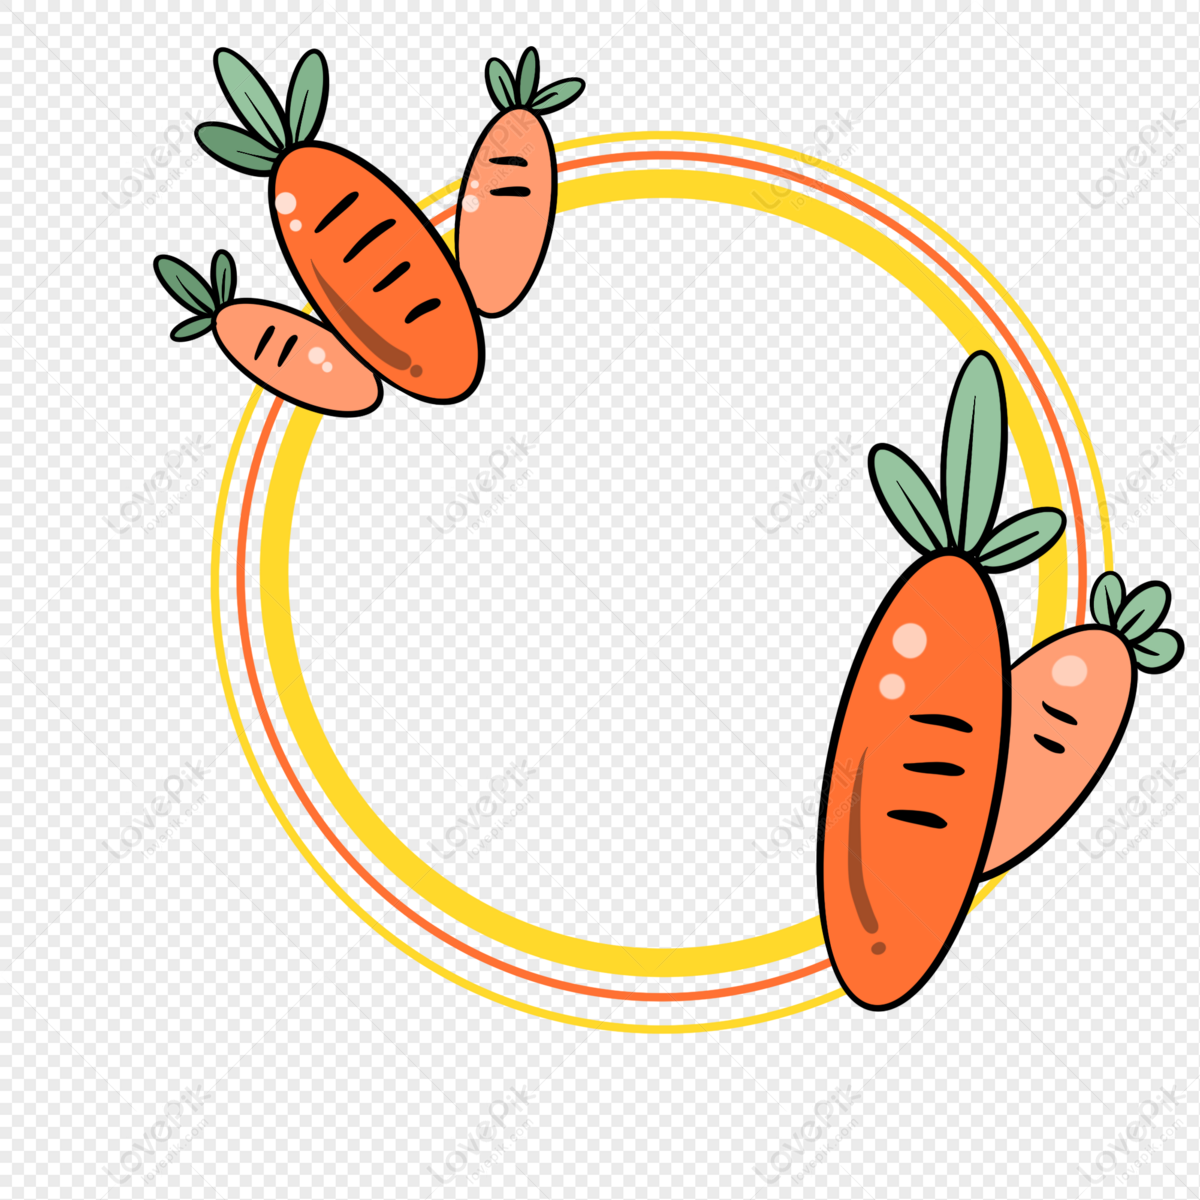 Cartoon Hand Drawn Vegetable Fruit Carrot Border PNG Picture And Clipart  Image For Free Download - Lovepik | 401442355